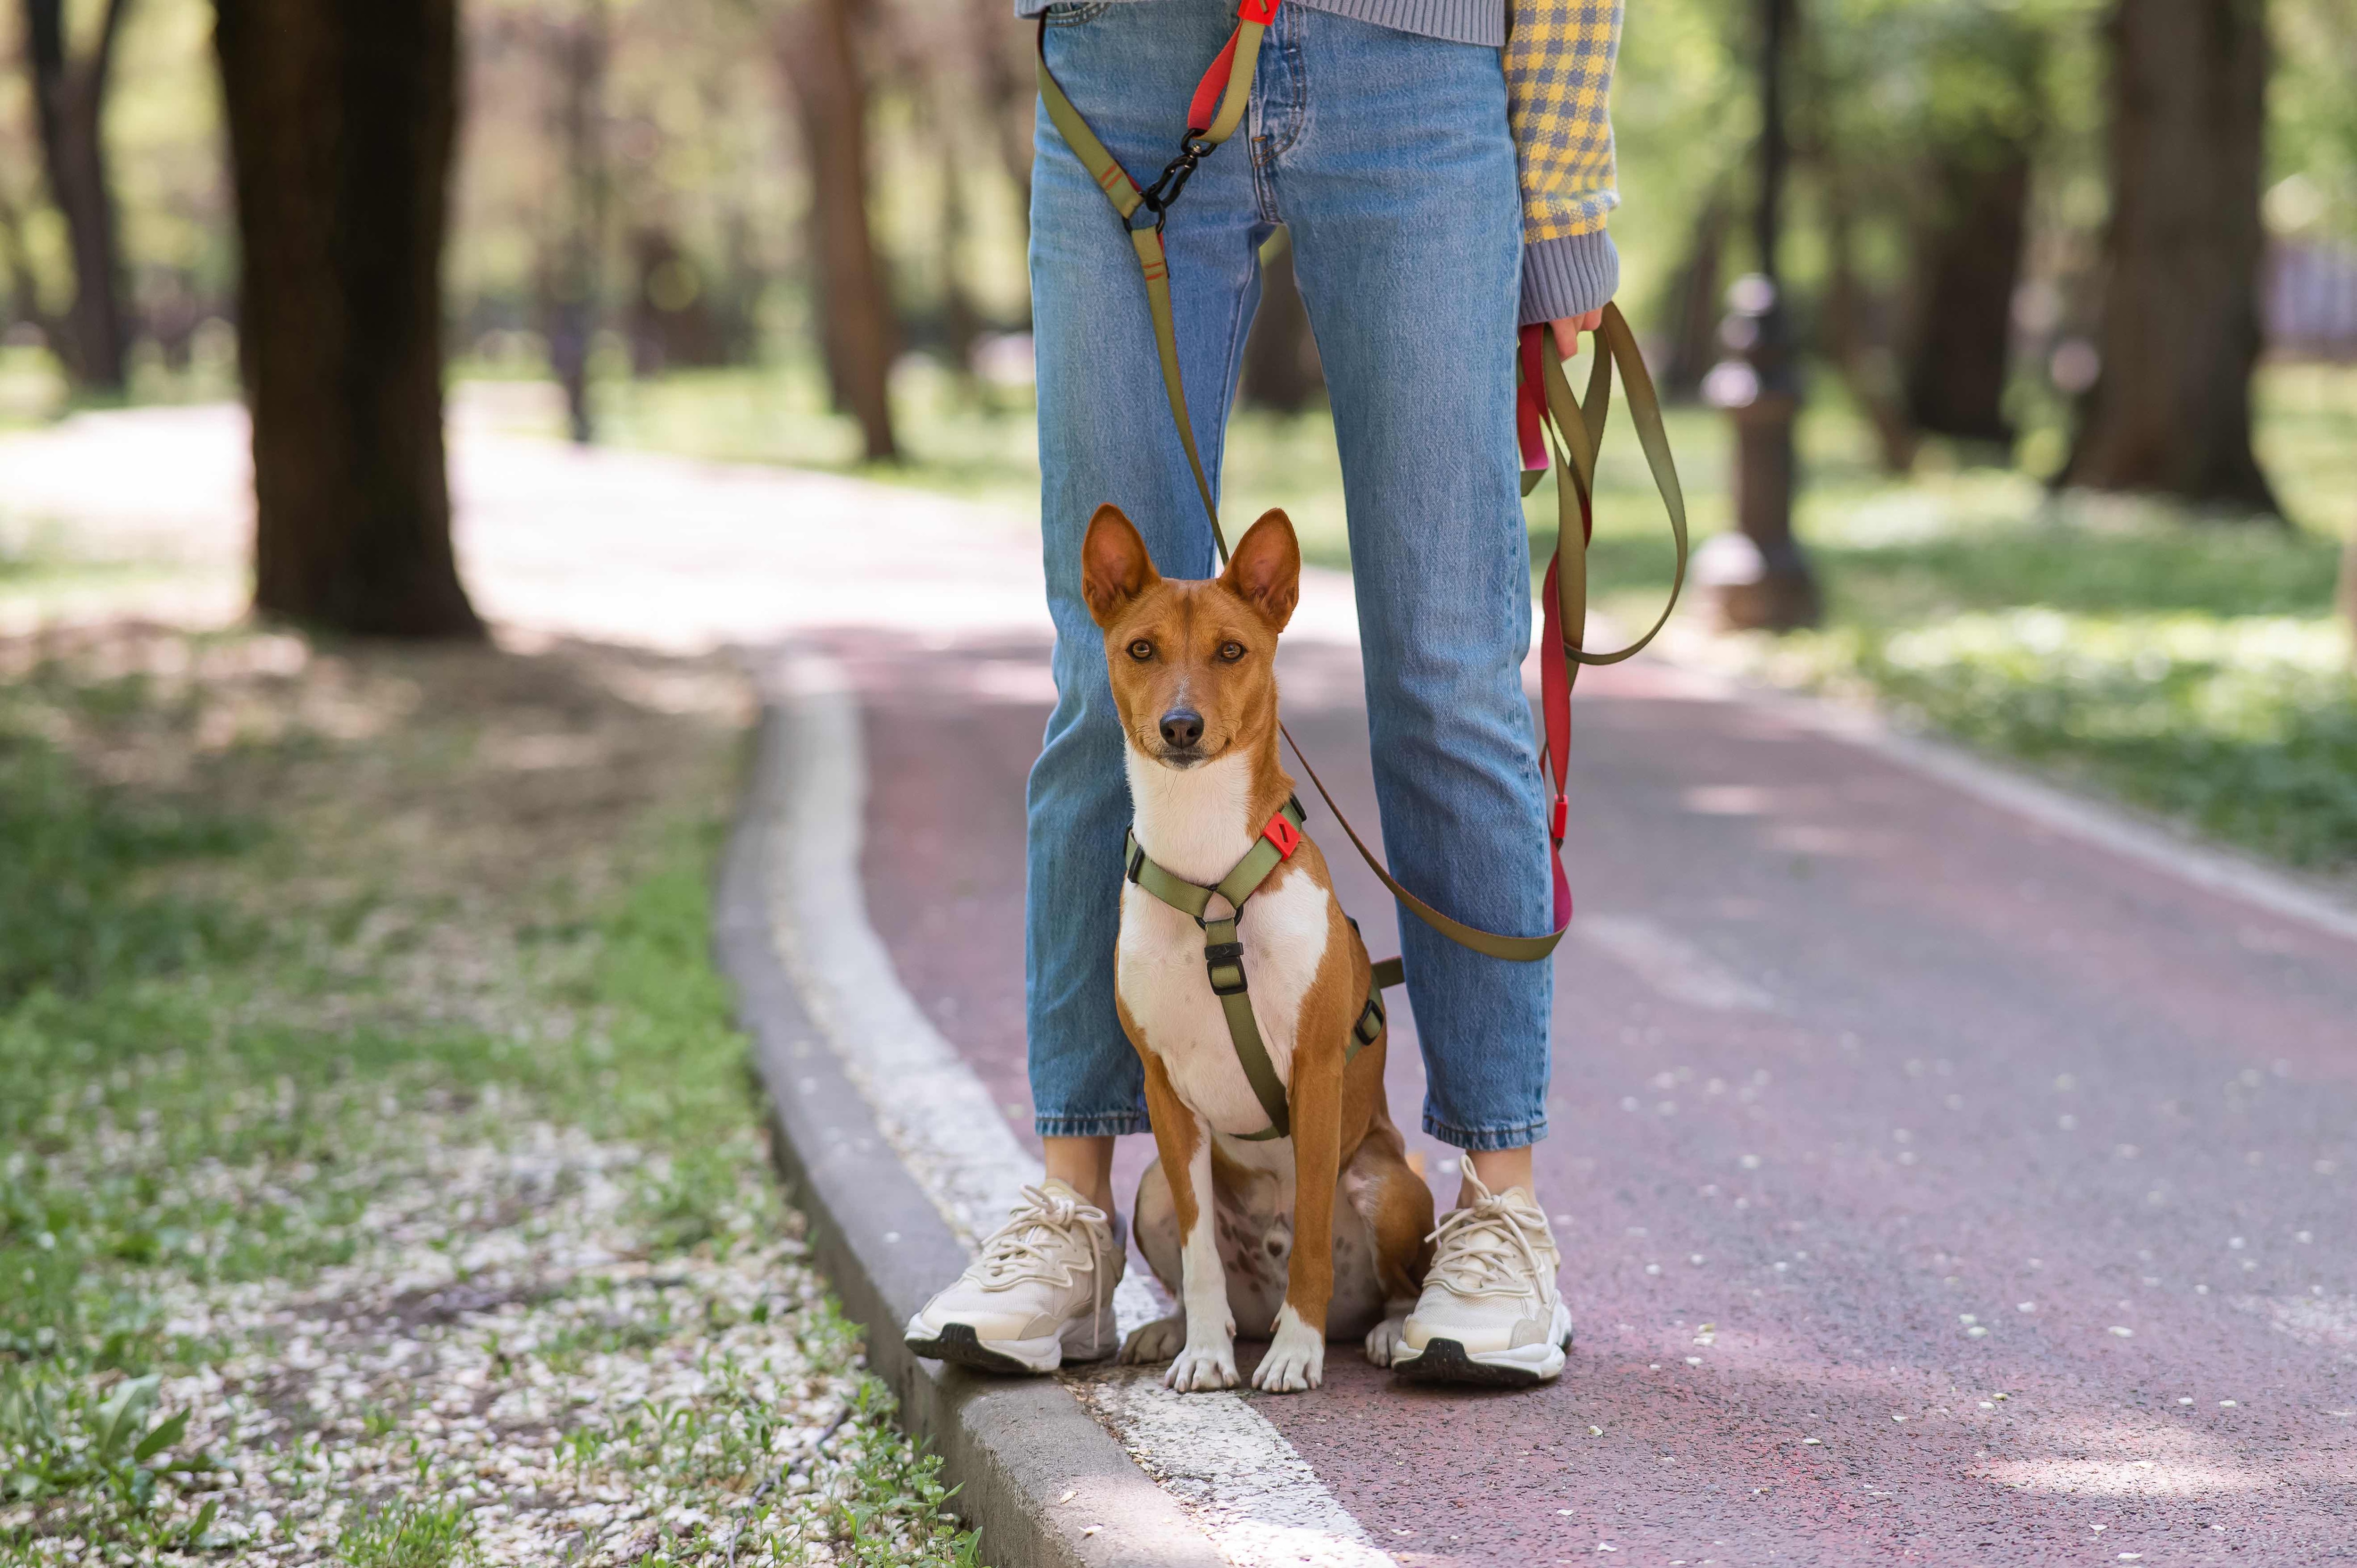 basenji dog on a walk sitting in front of a person's legs